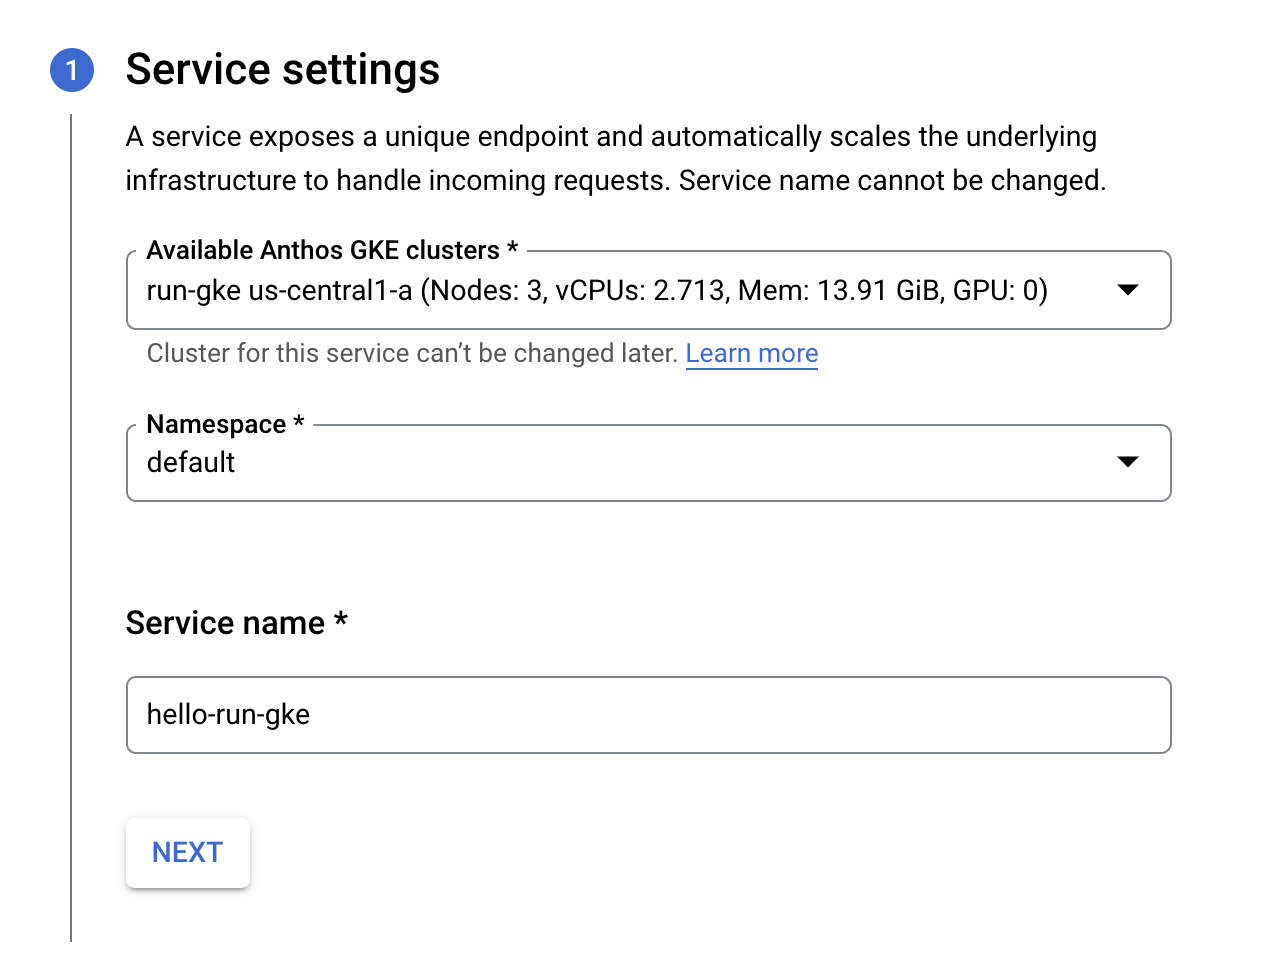 The Service settings page displaying the aforementioned settings